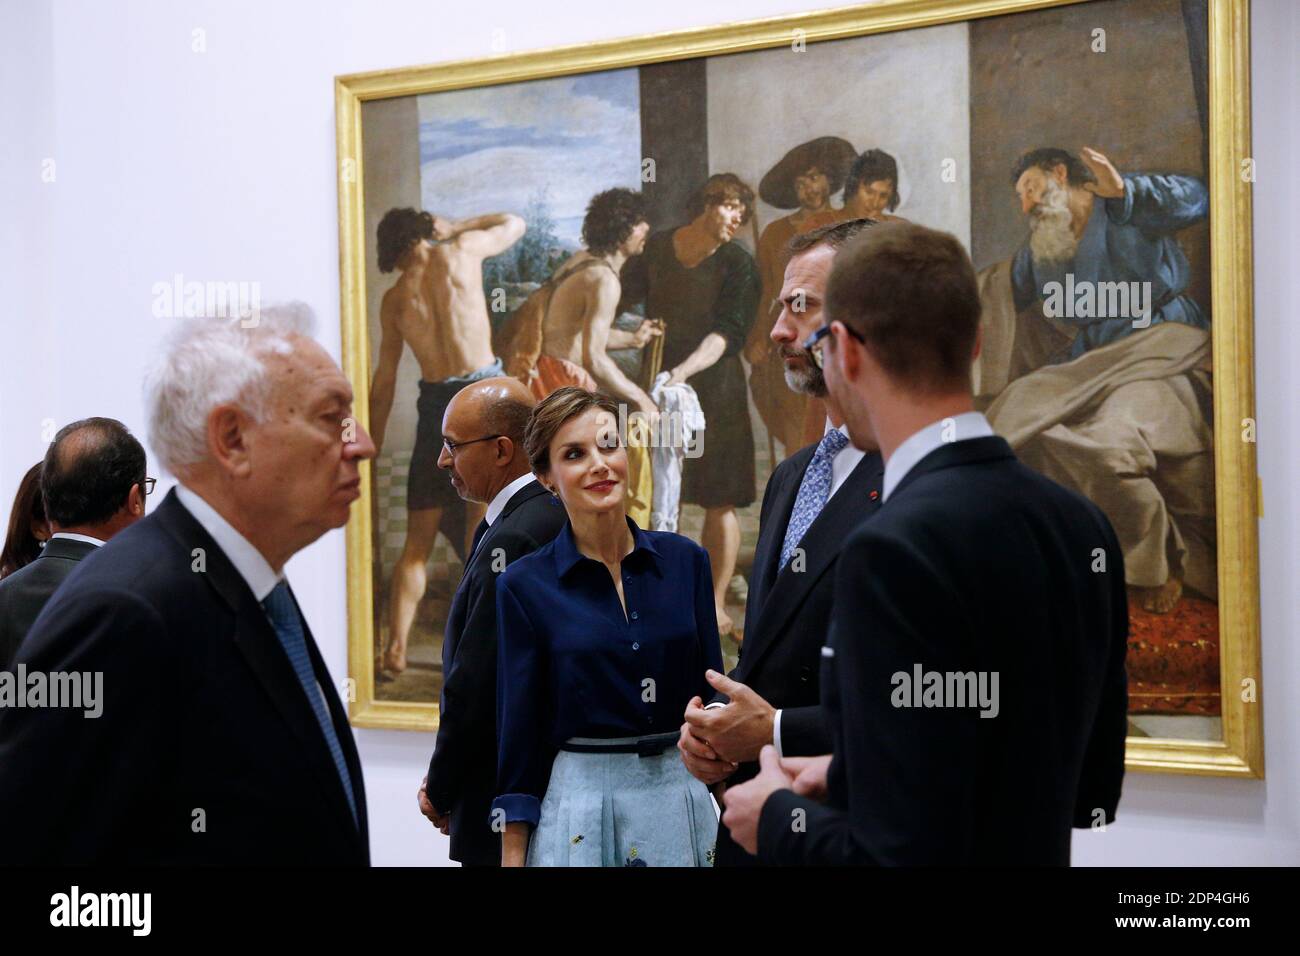 French President Francois Hollande, King Felipe VI and Queen Letizia of Spain pass by the painting 'La Tunique de Joseph' (Joseph's bloody coat brought to Jacob) as they tour the exhibition 'Velasquez - The golden age of Spanish art' at Grand Palais in Paris, France on June 2, 2015. Photo by Yoan Valat/Pool/ABACAPRESS.COM Stock Photo